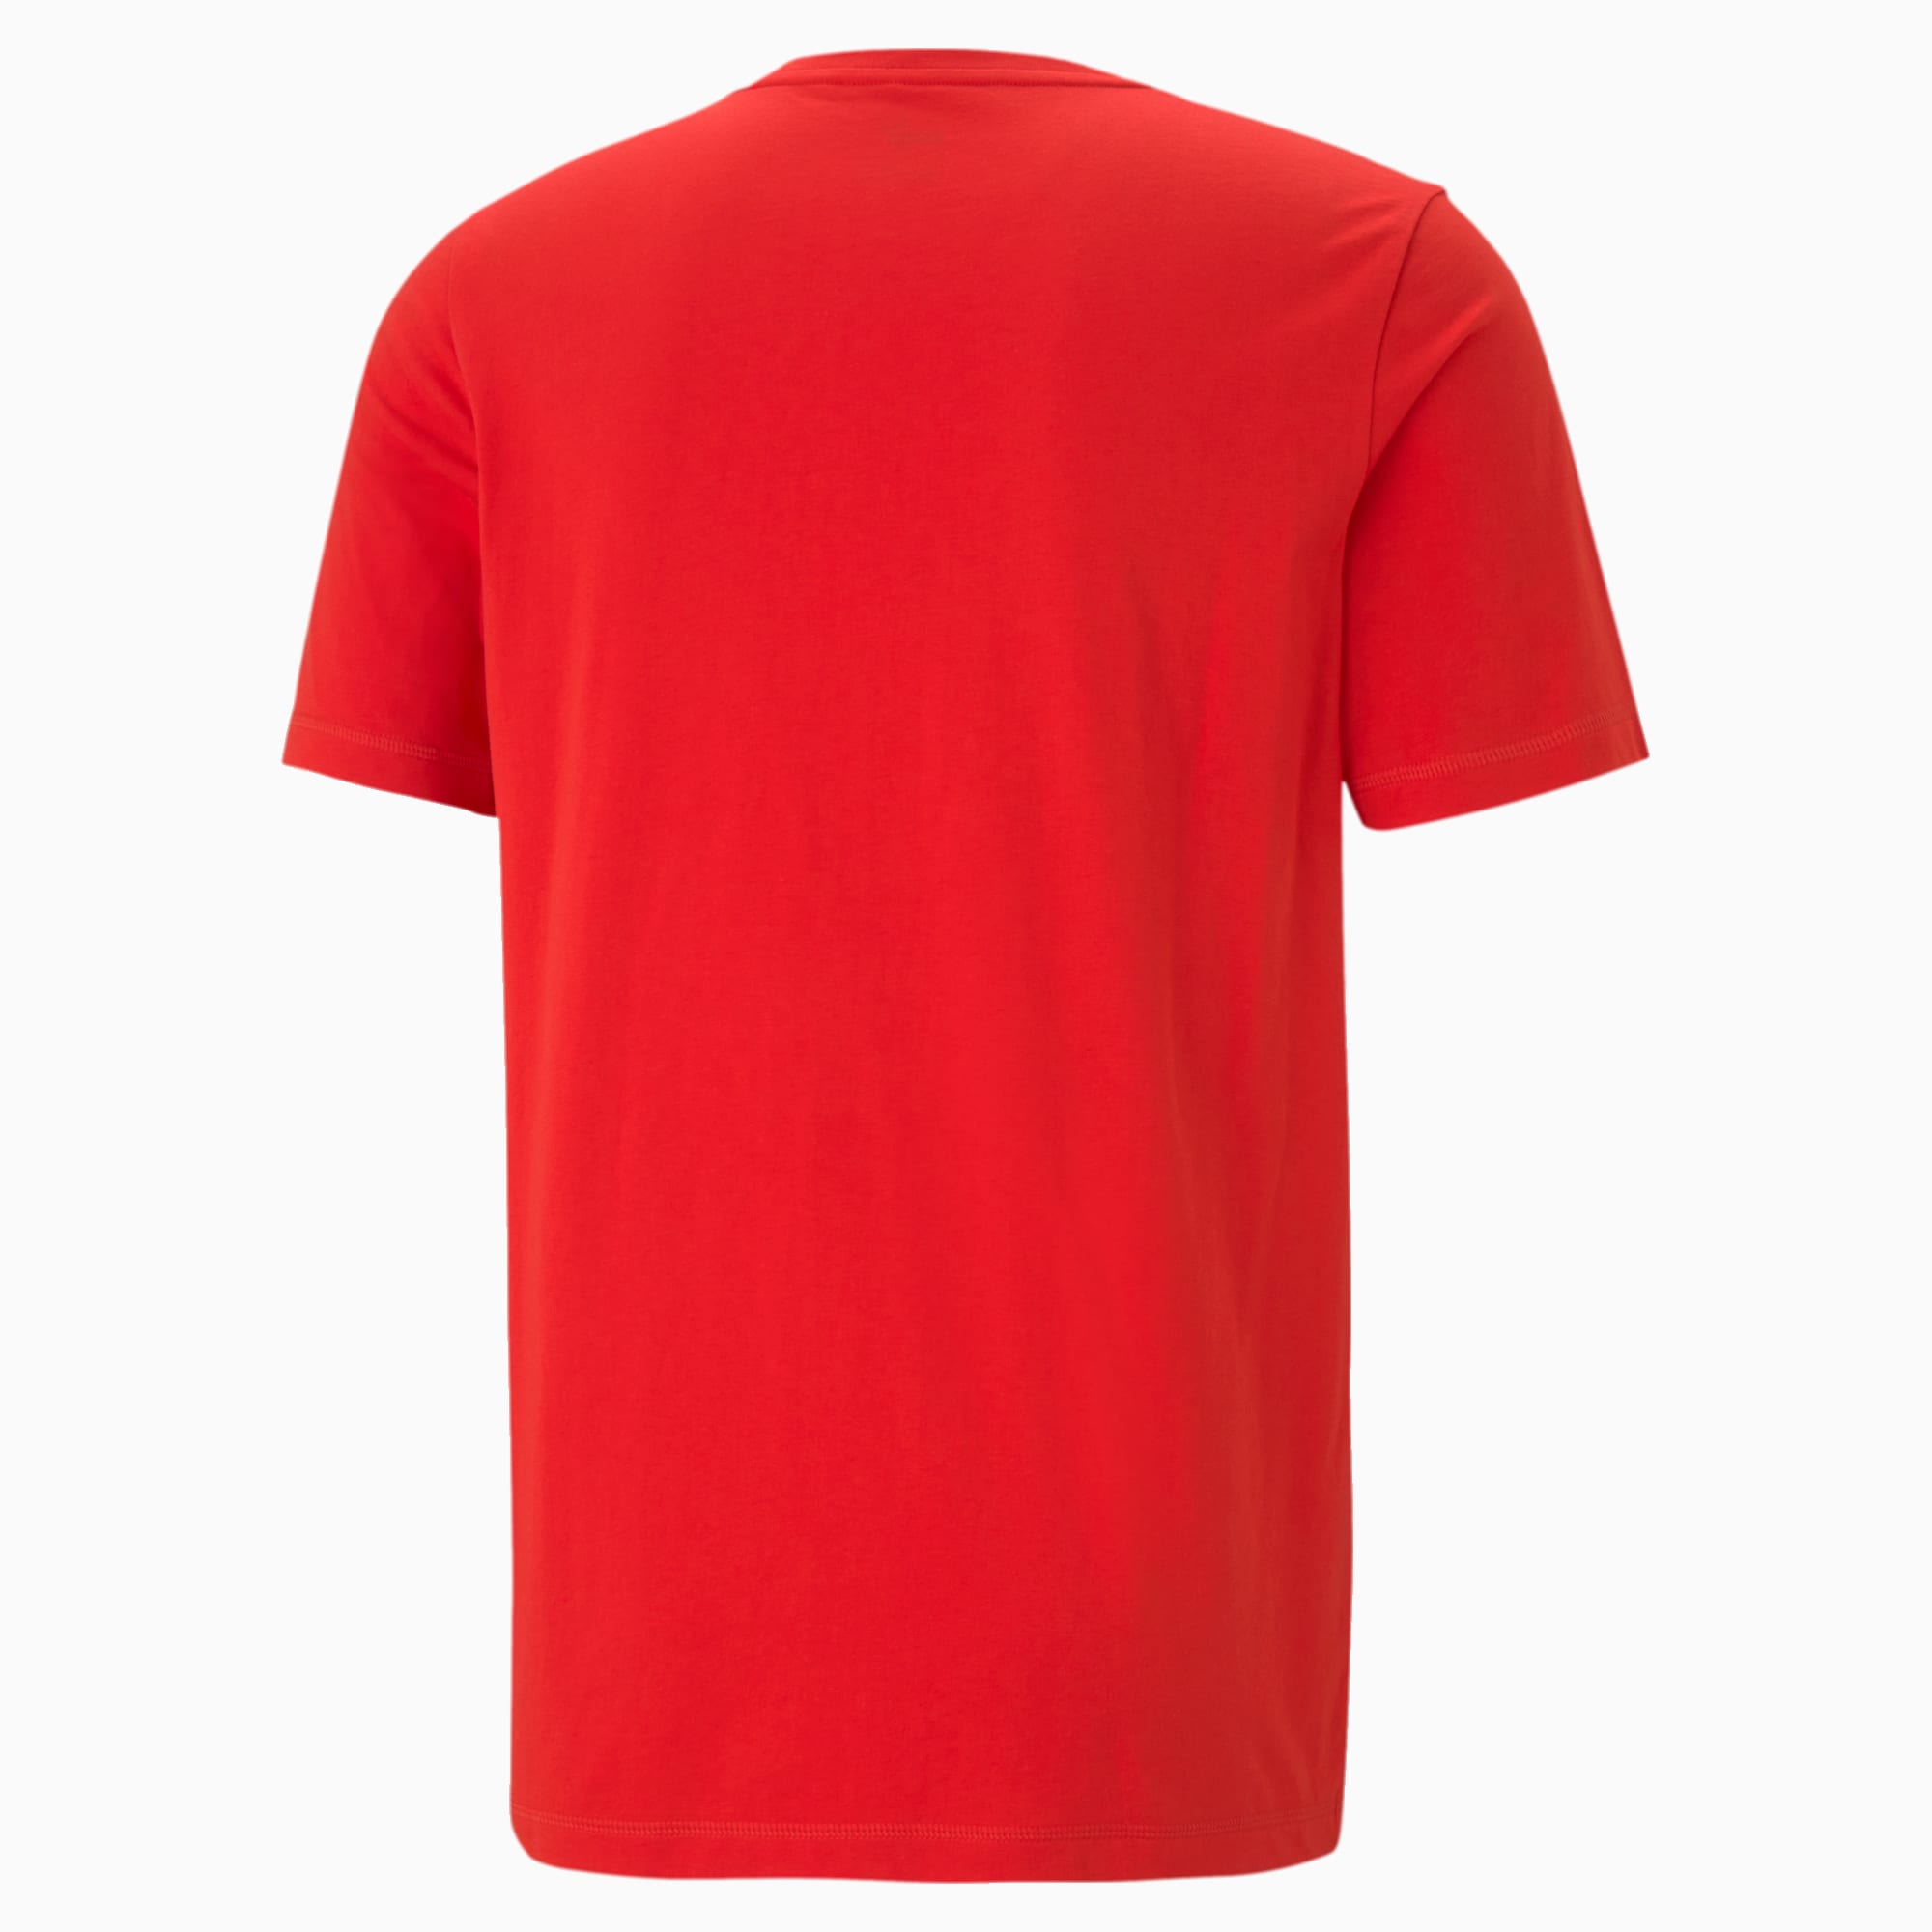 PUMA Active Soft Men's T-Shirt, High Risk Red, Size 4XL, Clothing